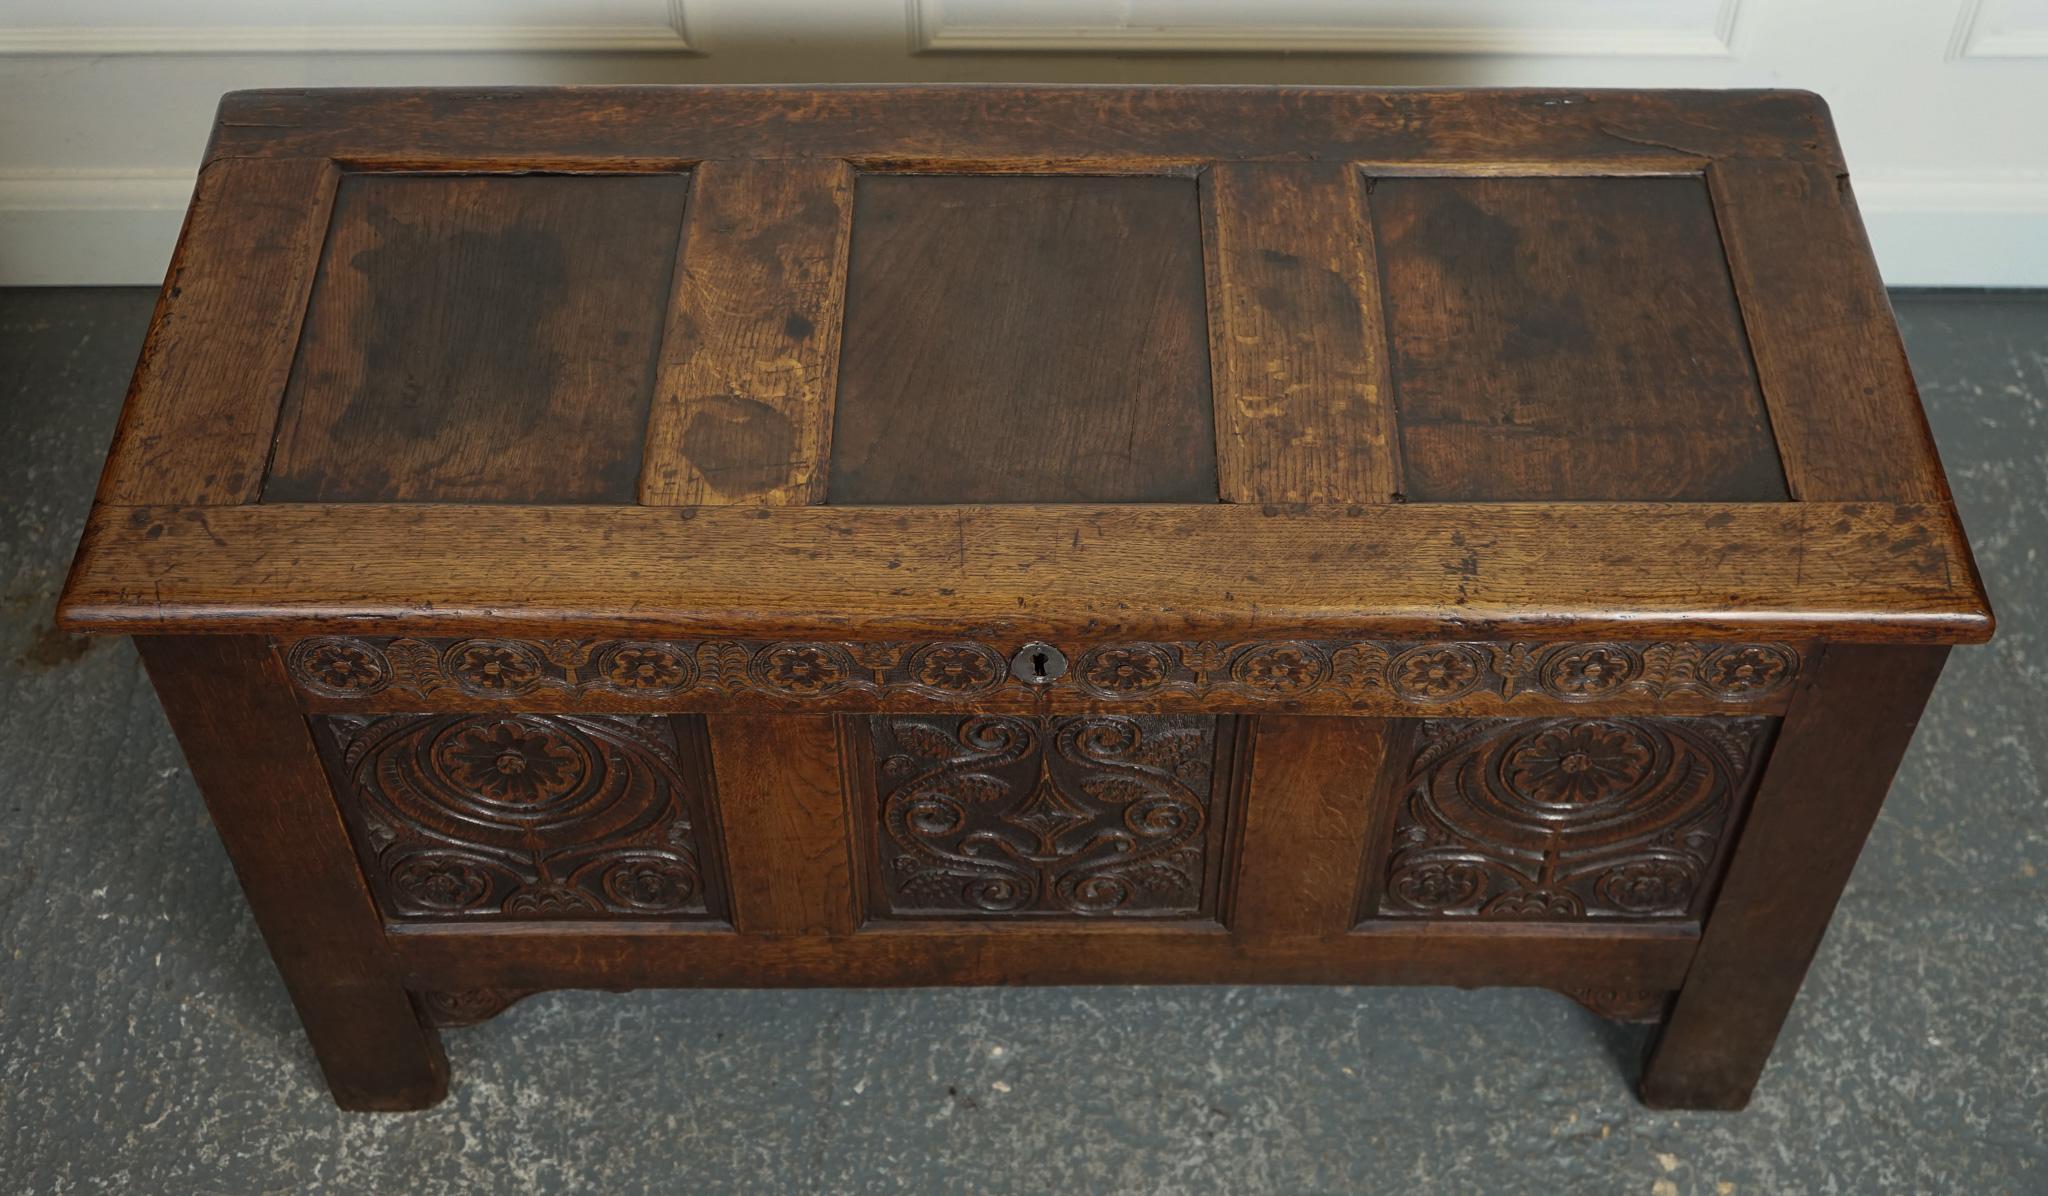 LOVELY 17TH CENTURY CARVED ANTIQUE OAK TRUNK CHEST COFFER j1 For Sale 7